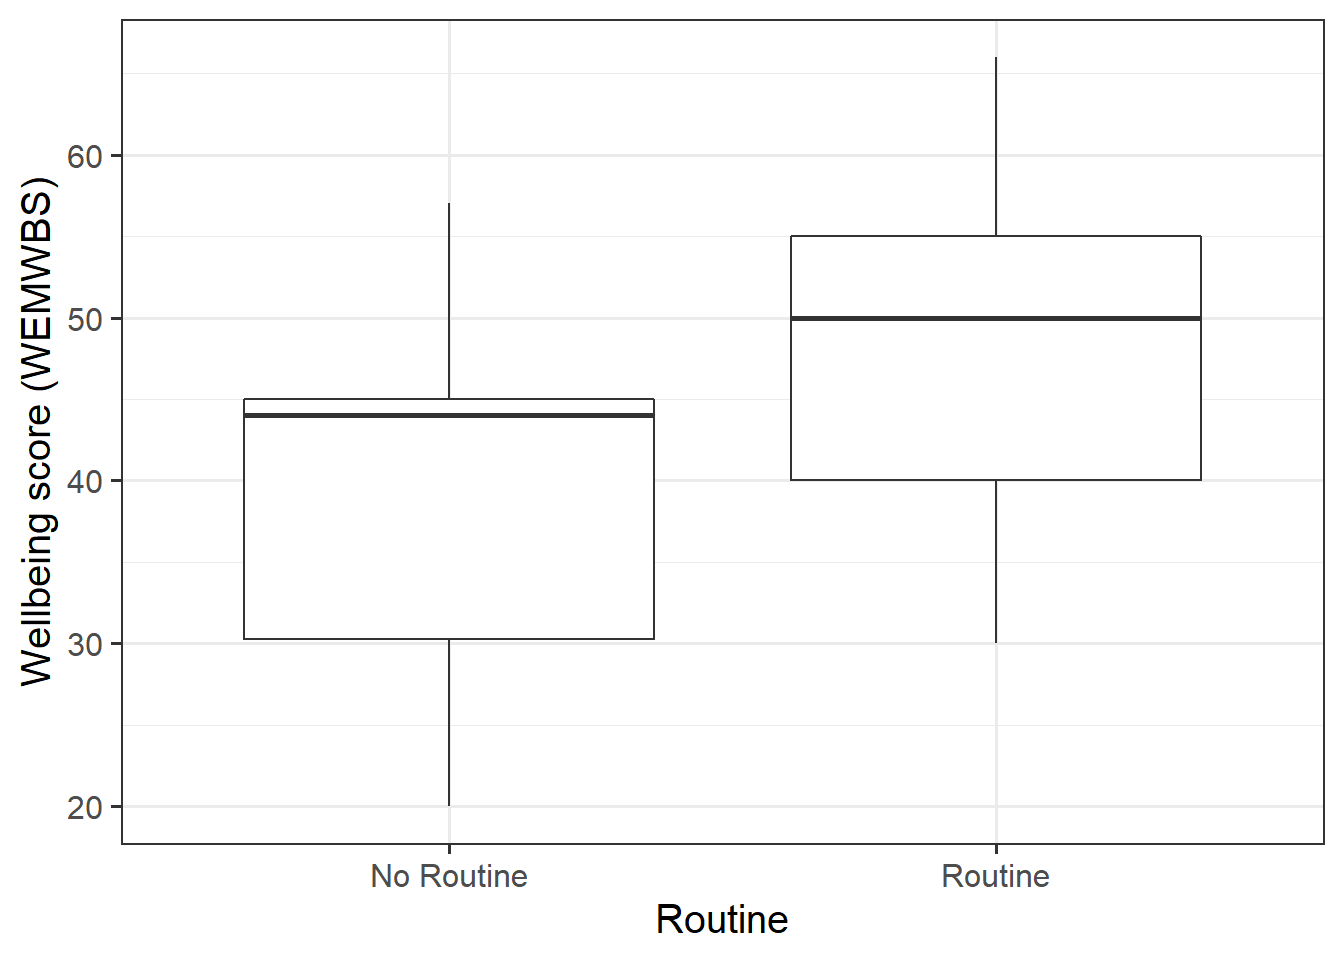 Relationship between wellbeing and presence of routine